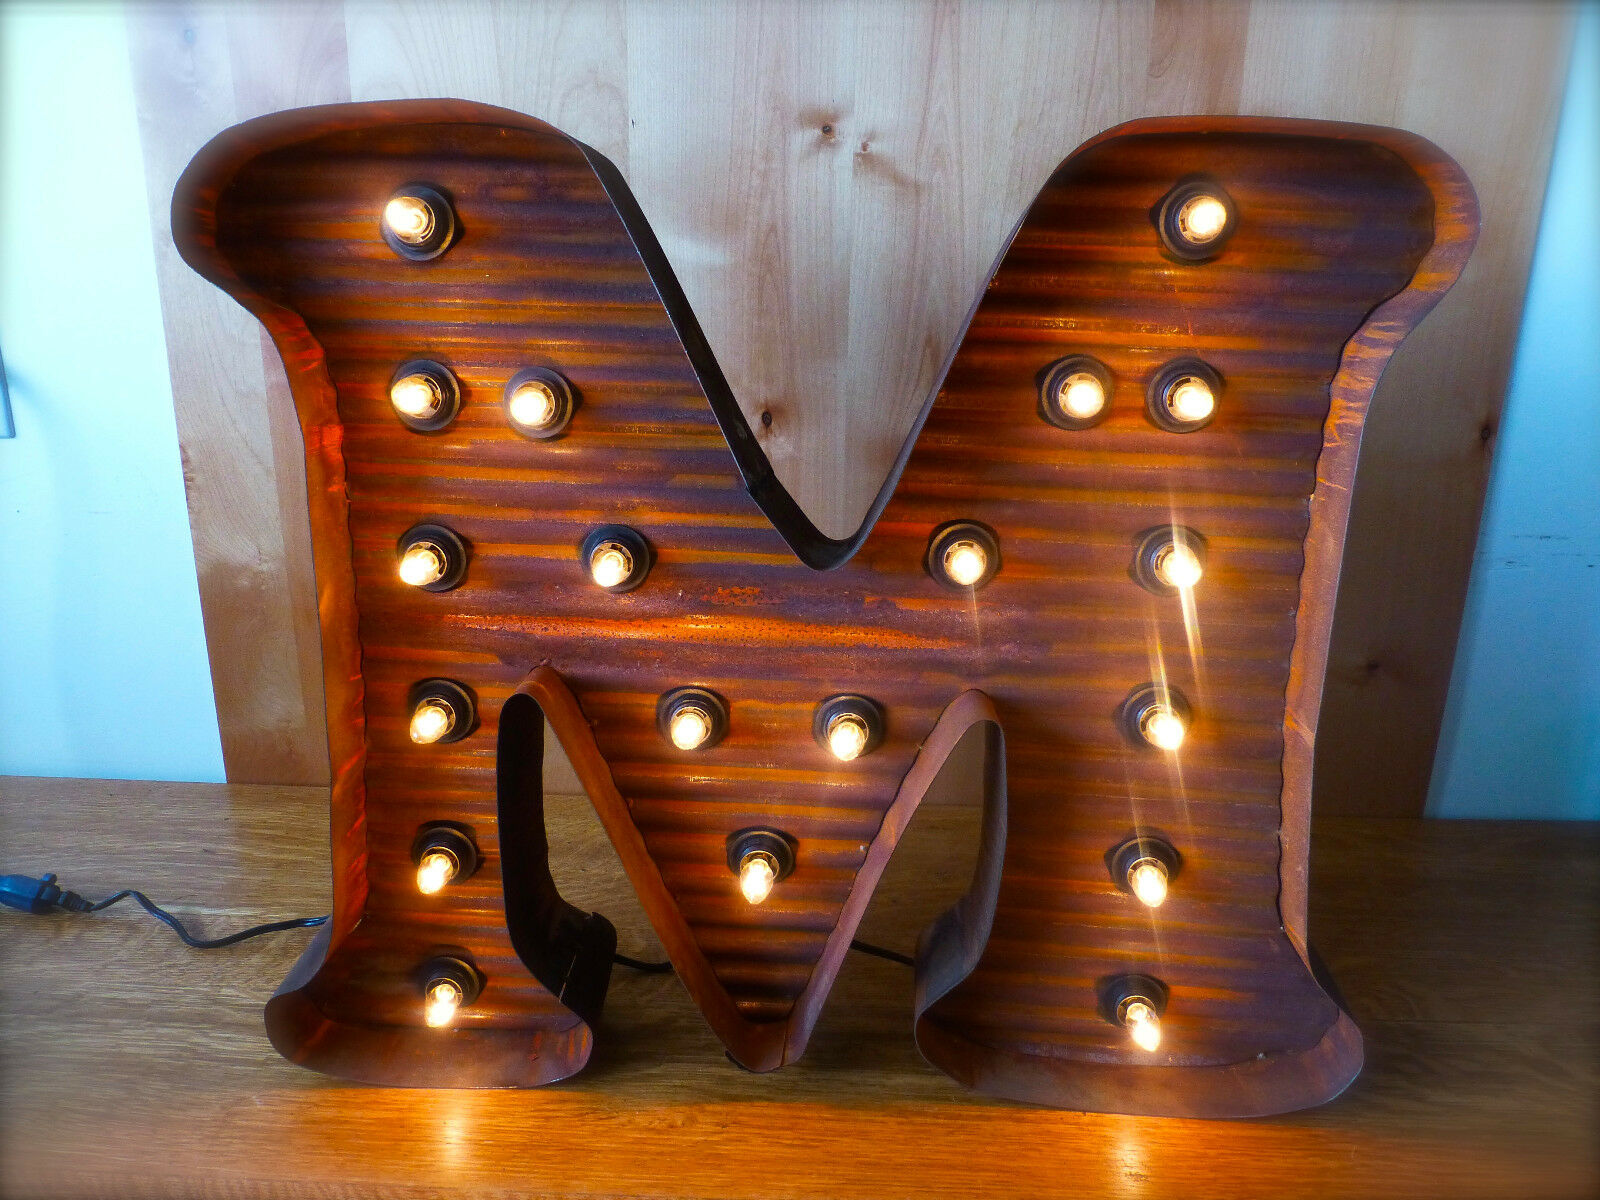 Large Vintage Style Light Up Marquee Letter M, 24" Tall Industrial Rustic Sign